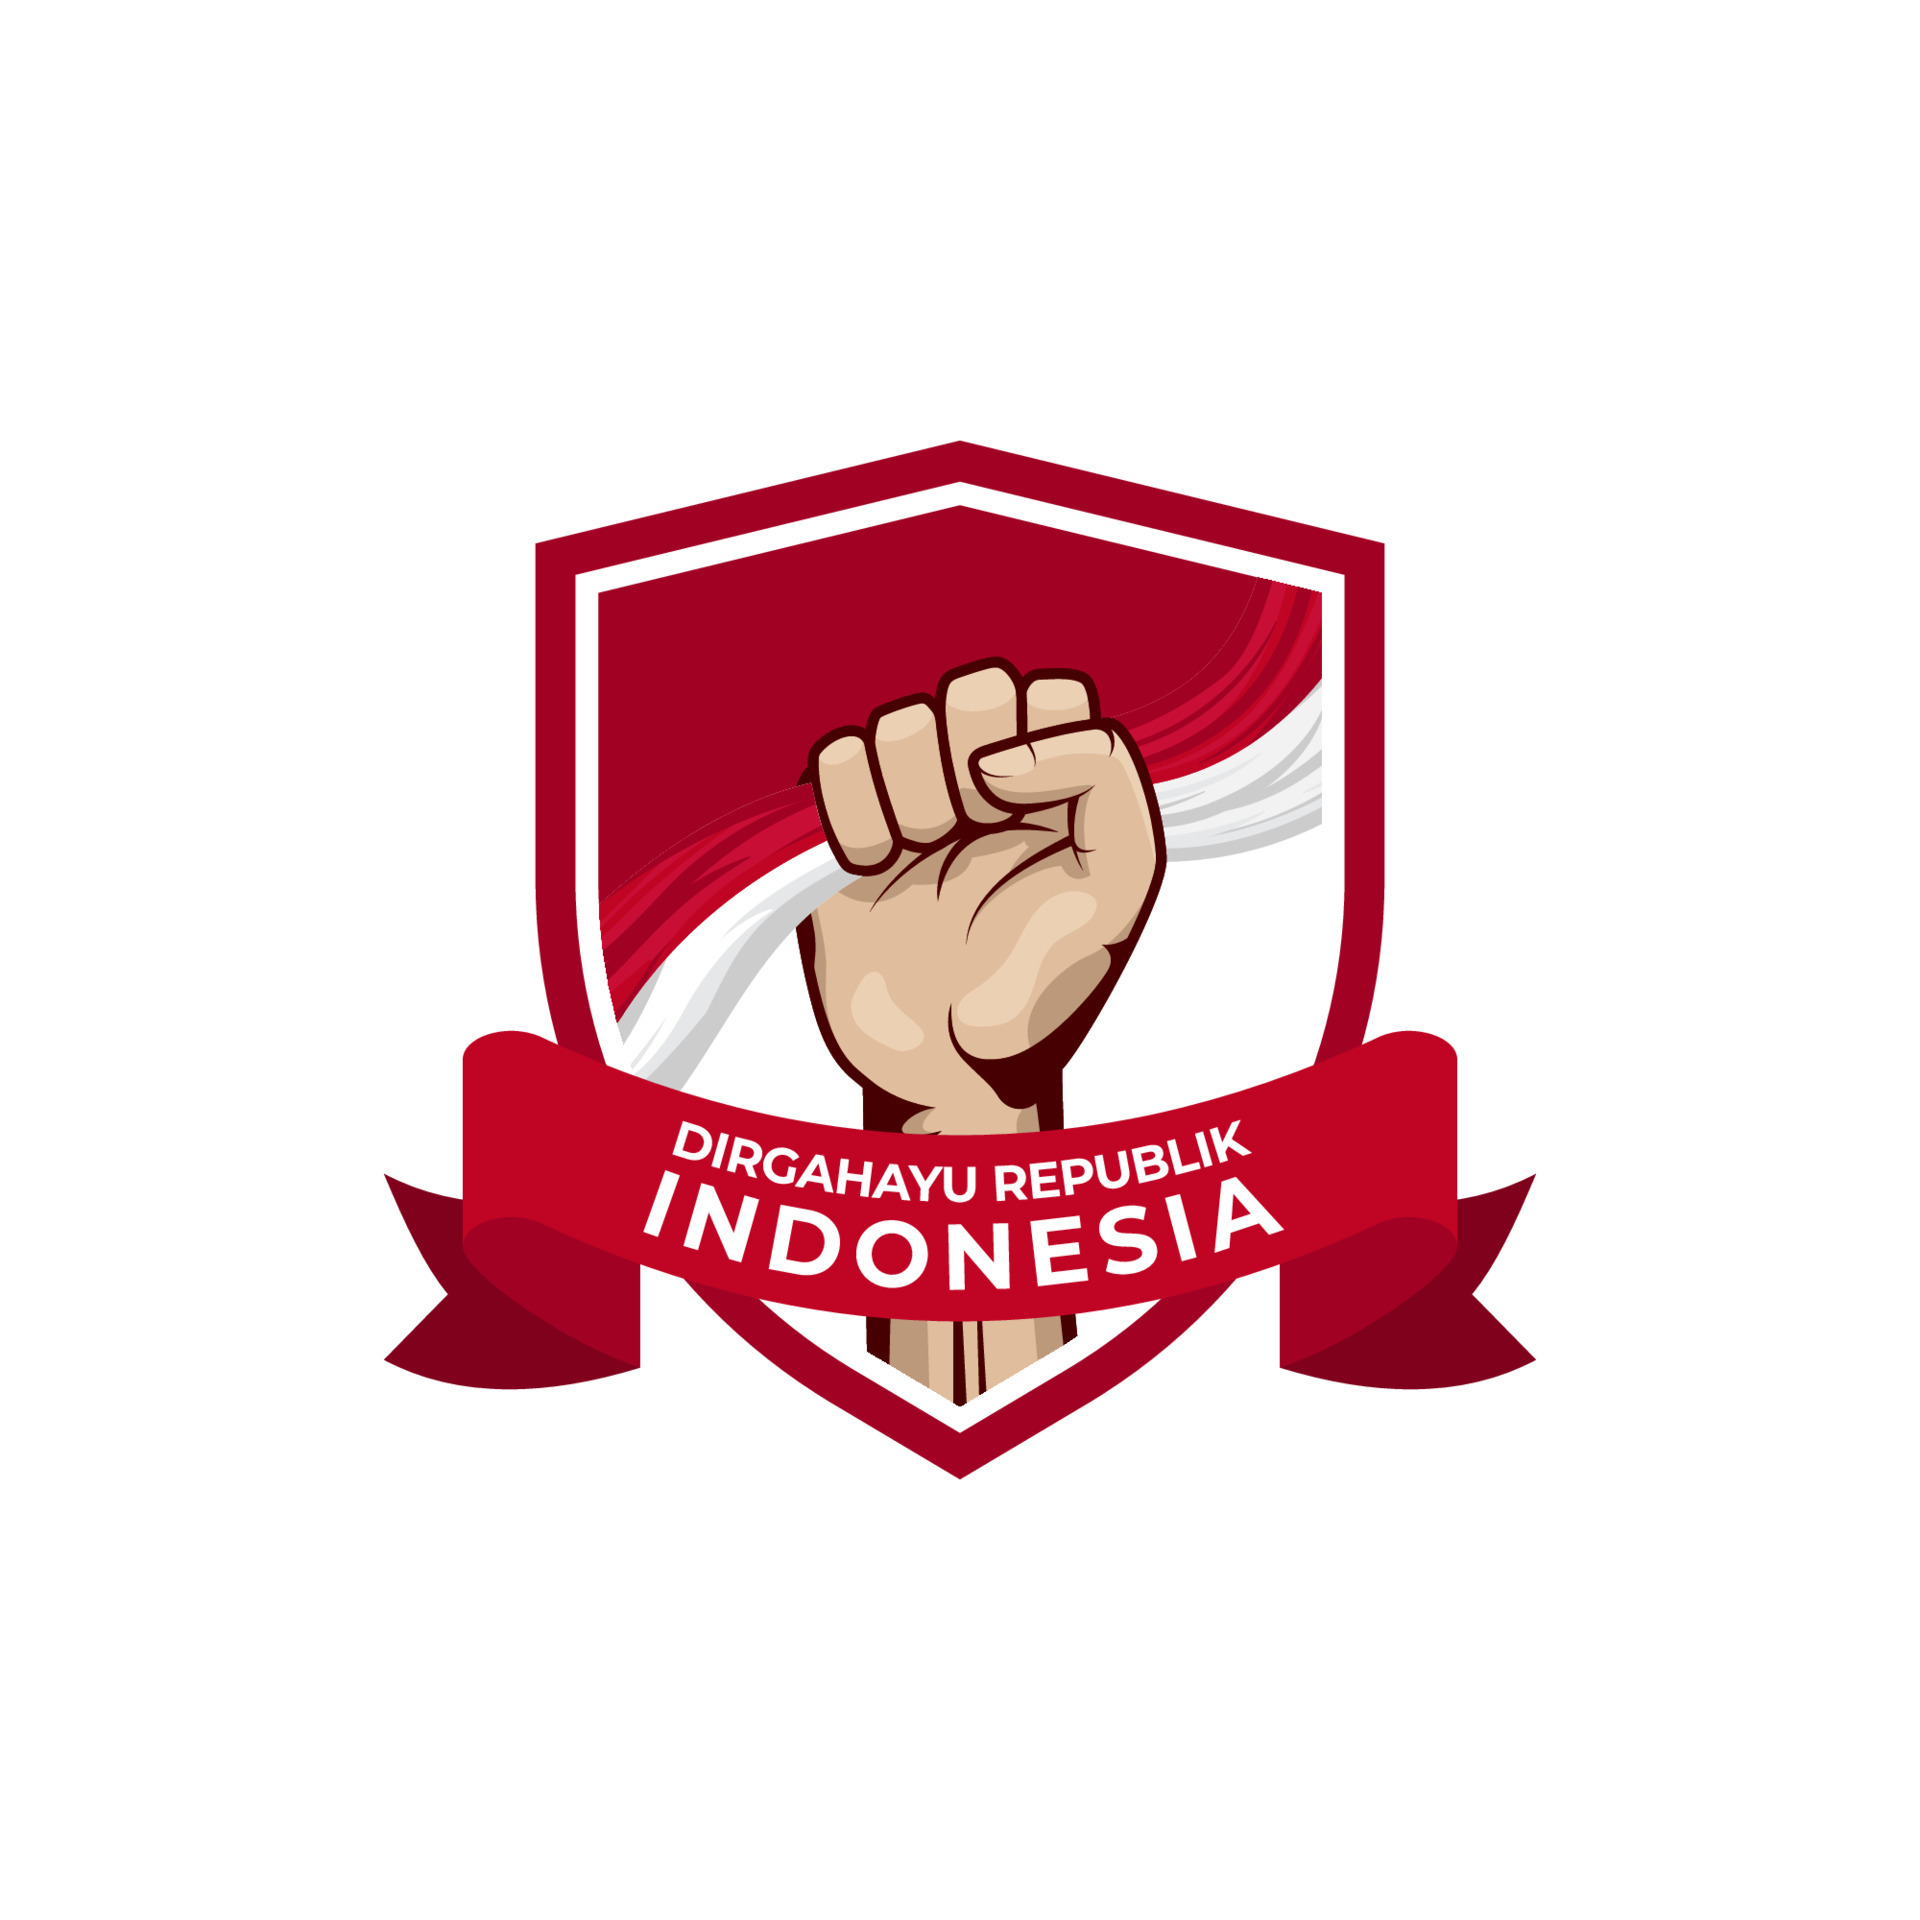 Indonesia independence day illustration design with Clenched fist hand ...